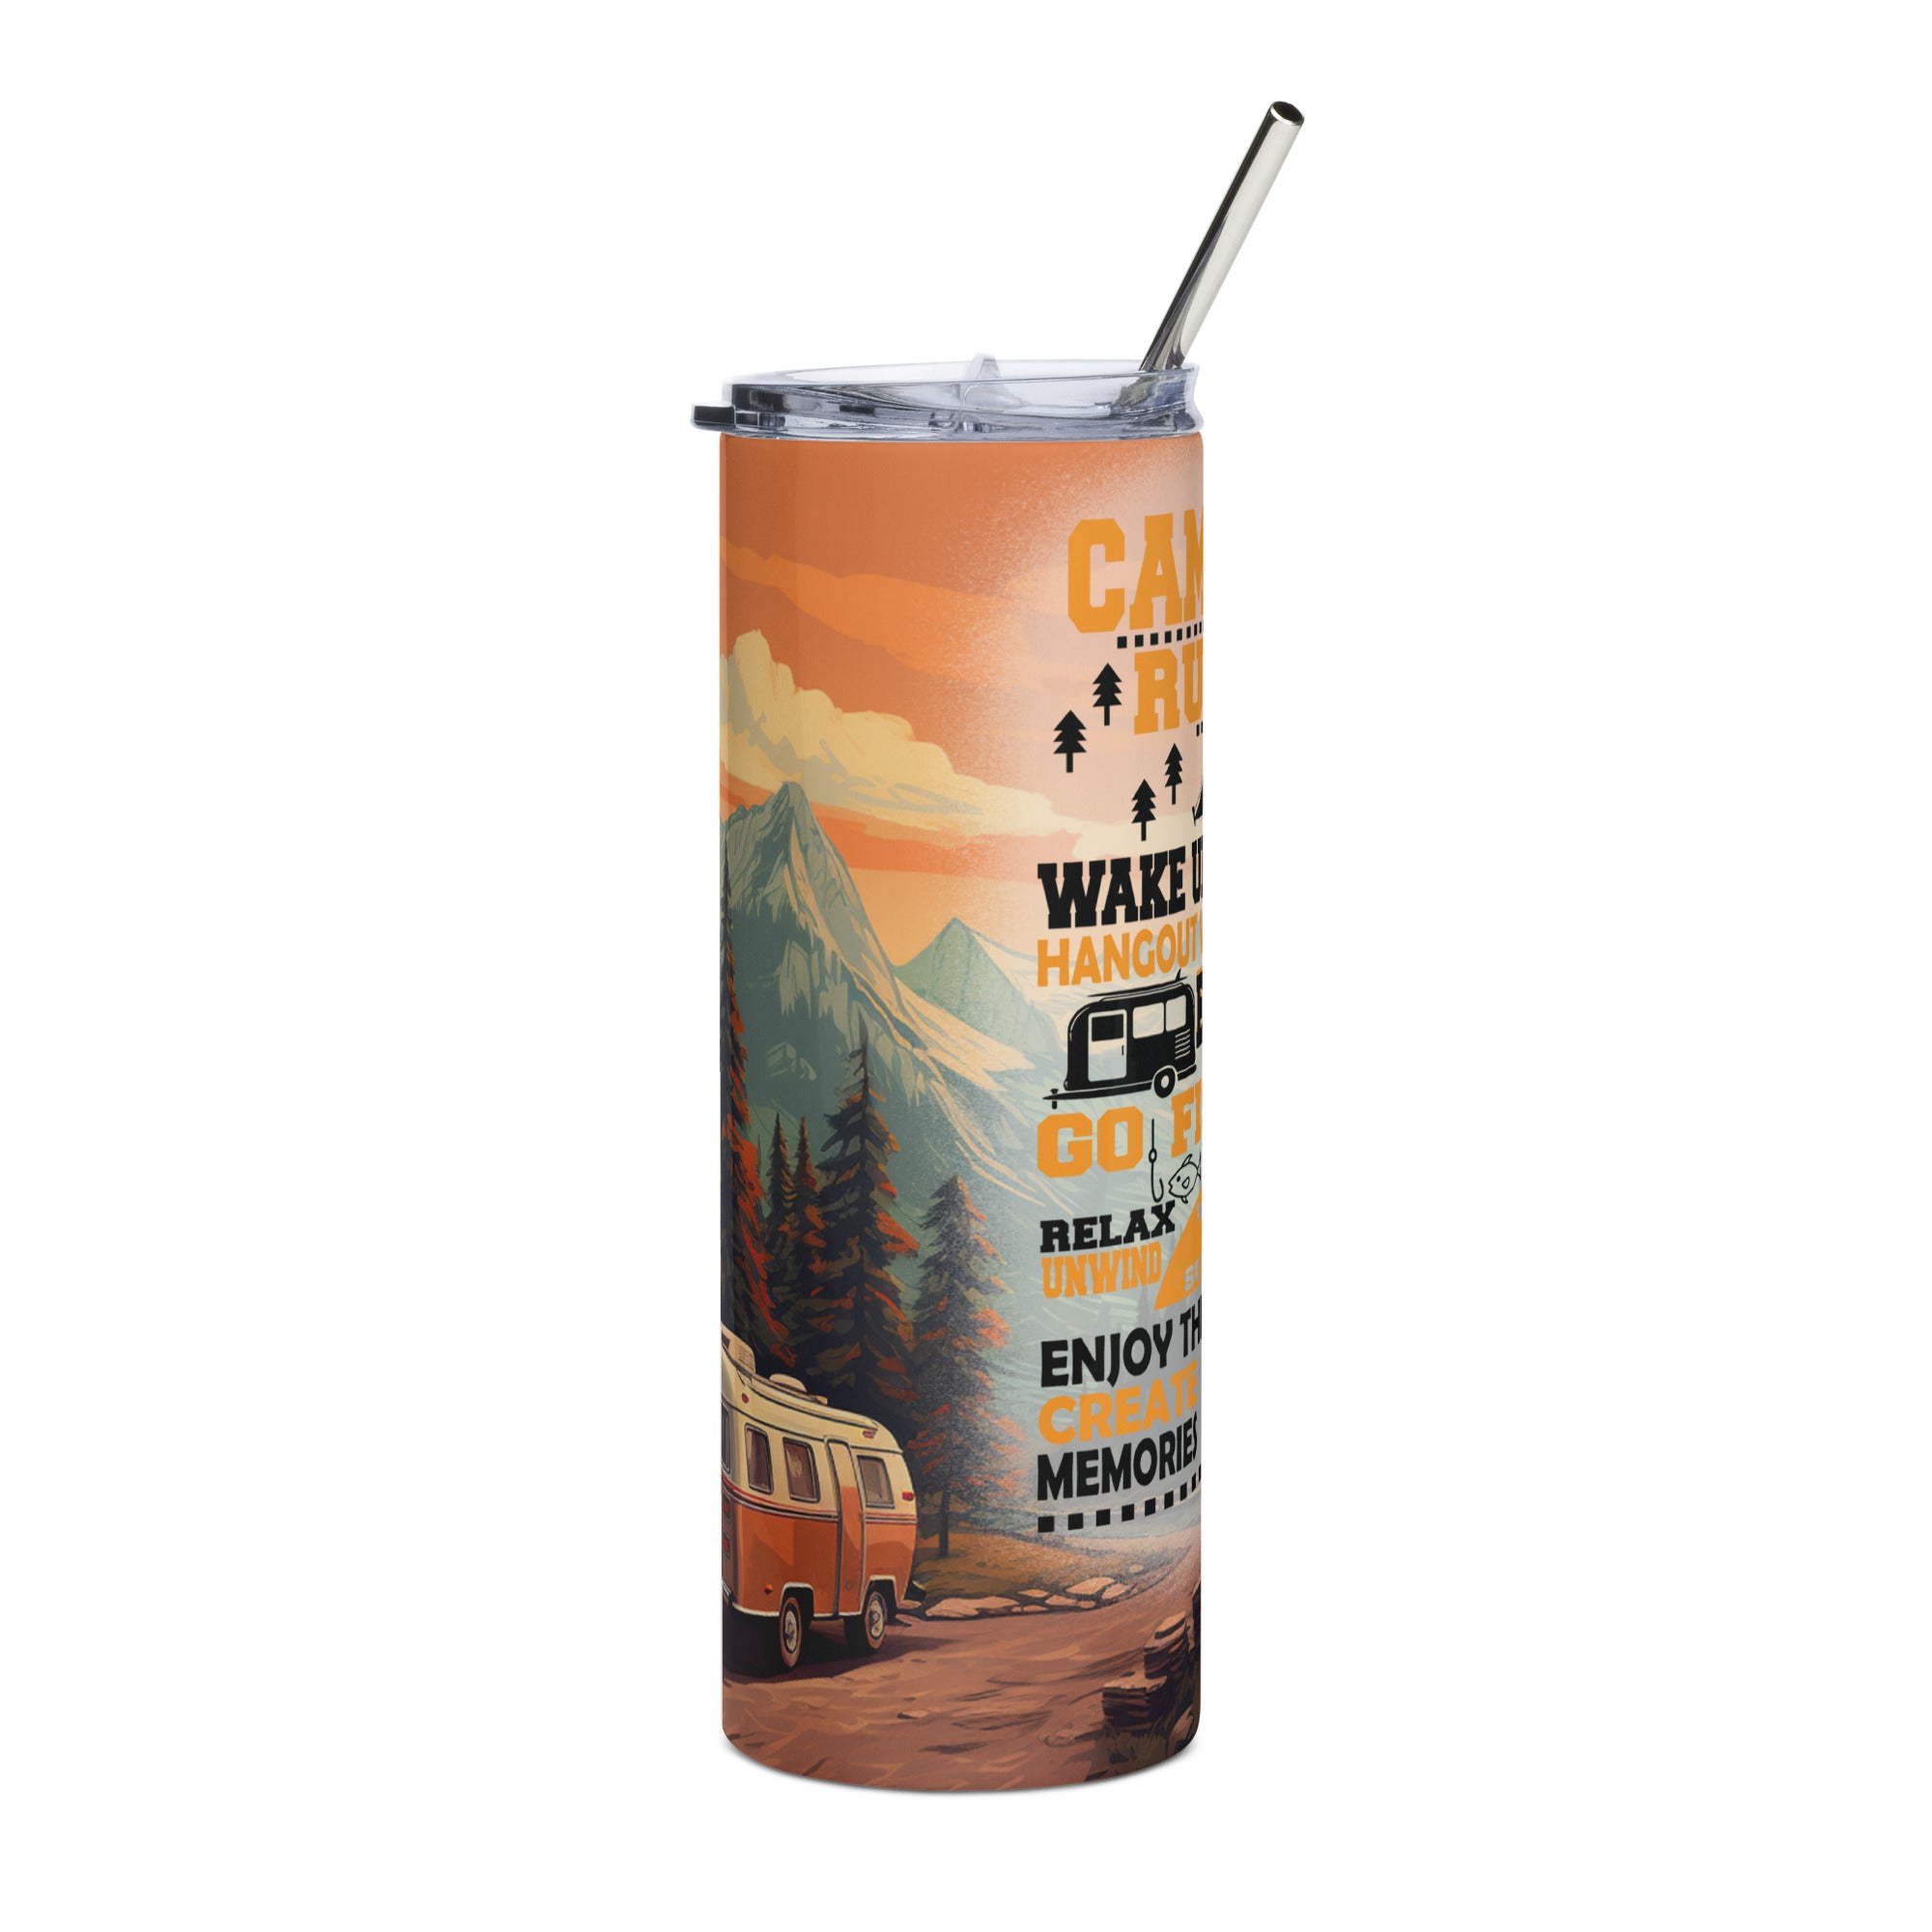 Camping Rules - Stainless Steel Tumbler